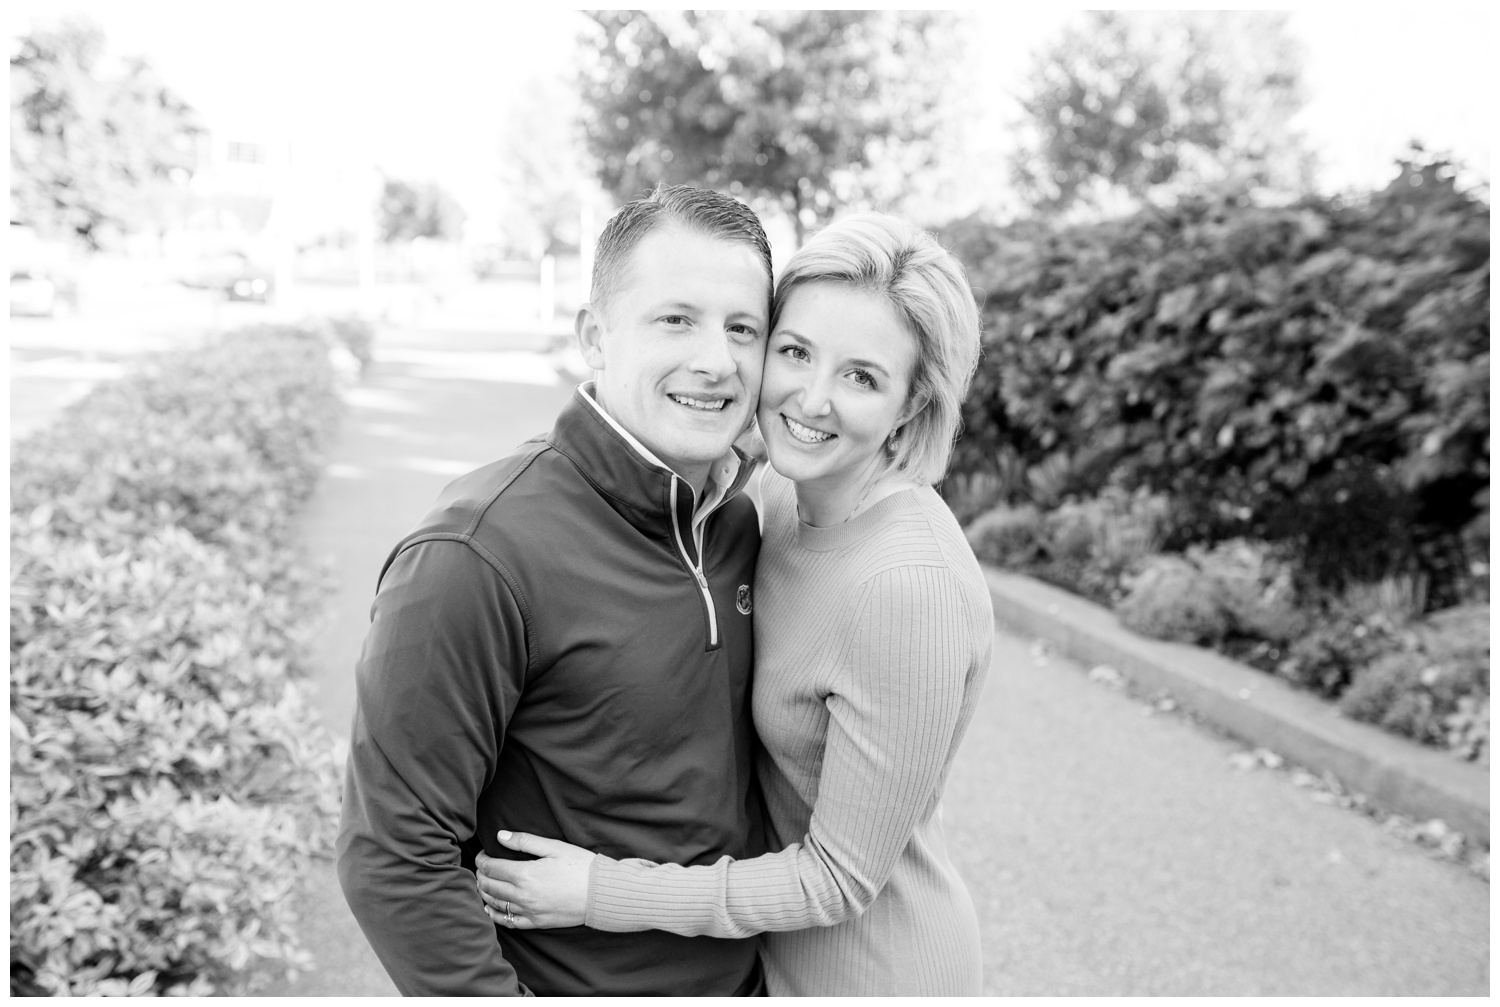 Smale Park Engagement - Black and White Engagement